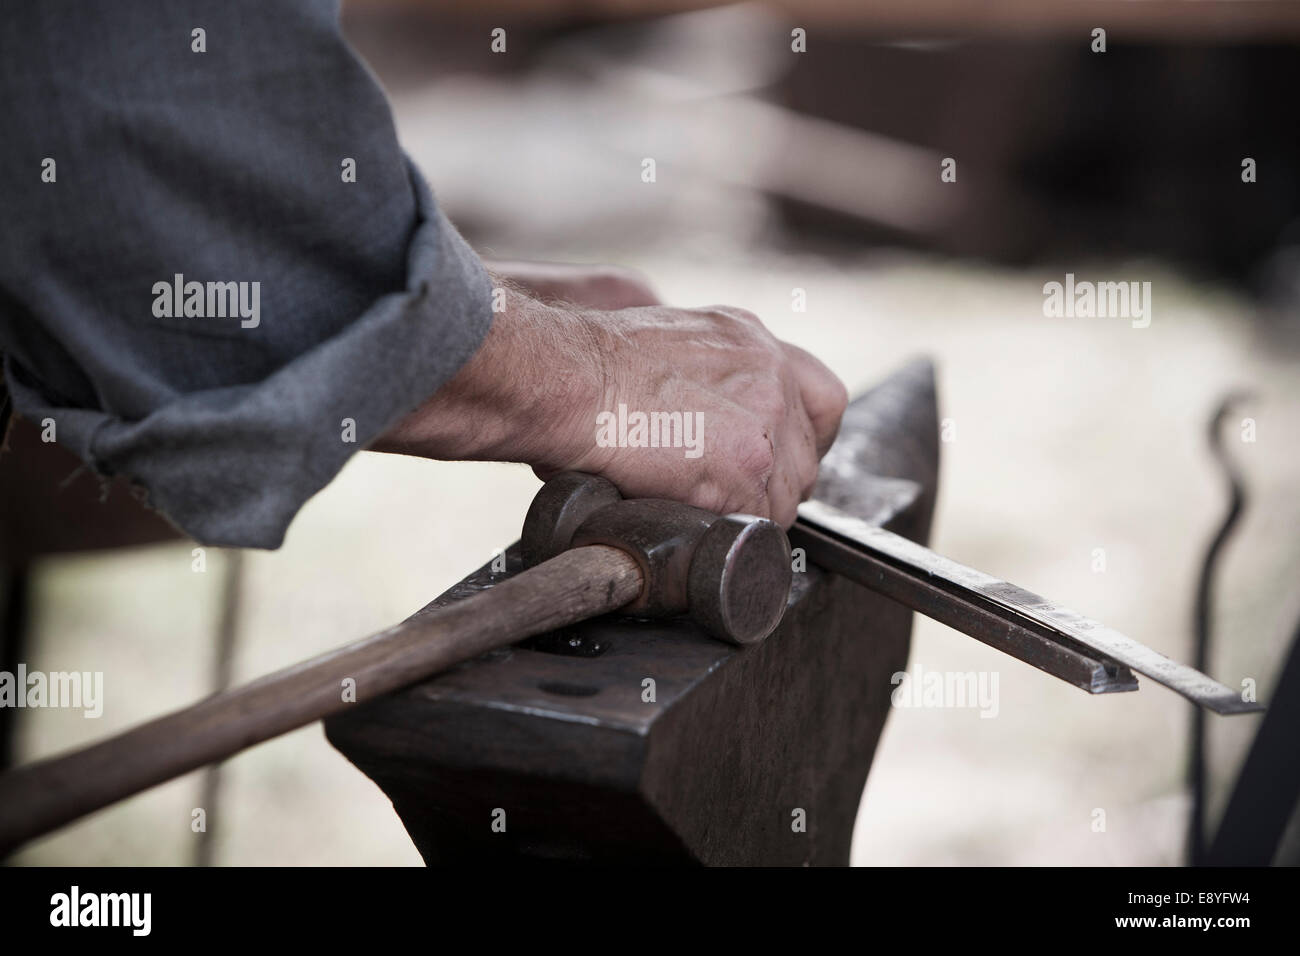 Close up view of blacksmiths hands working metal on an anvil. Stock Photo